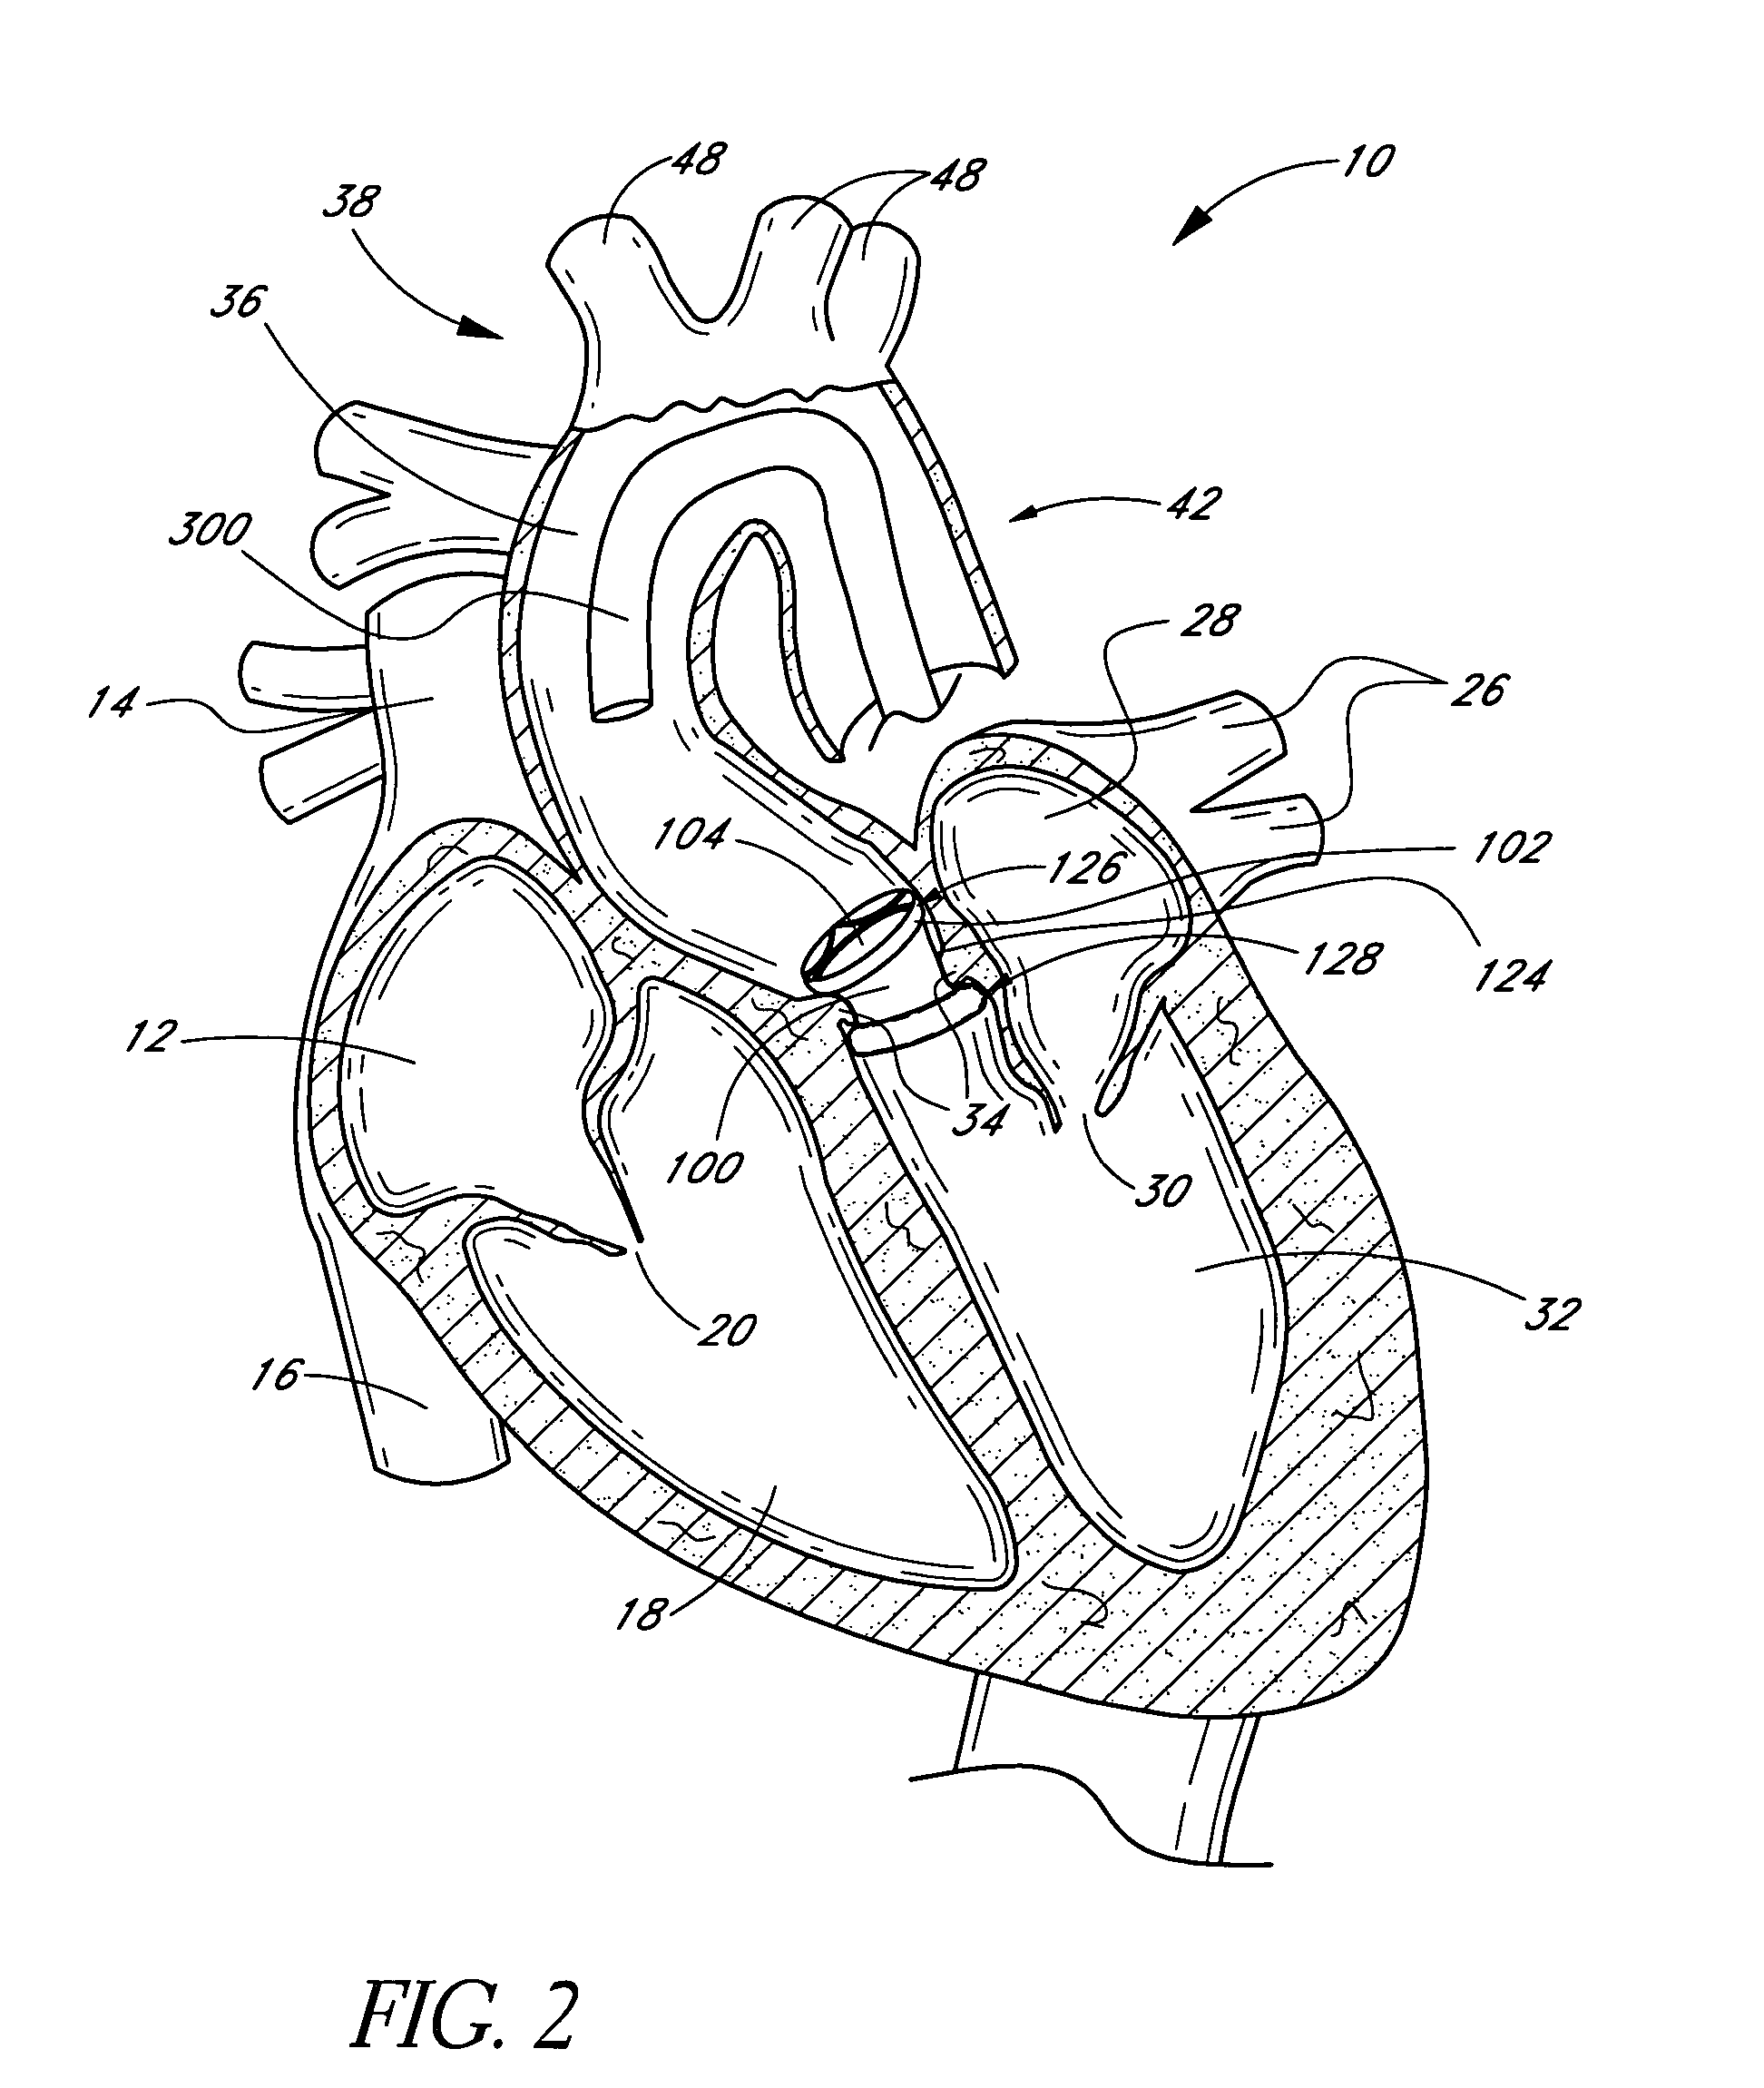 Nonstented temporary valve for cardiovascular therapy